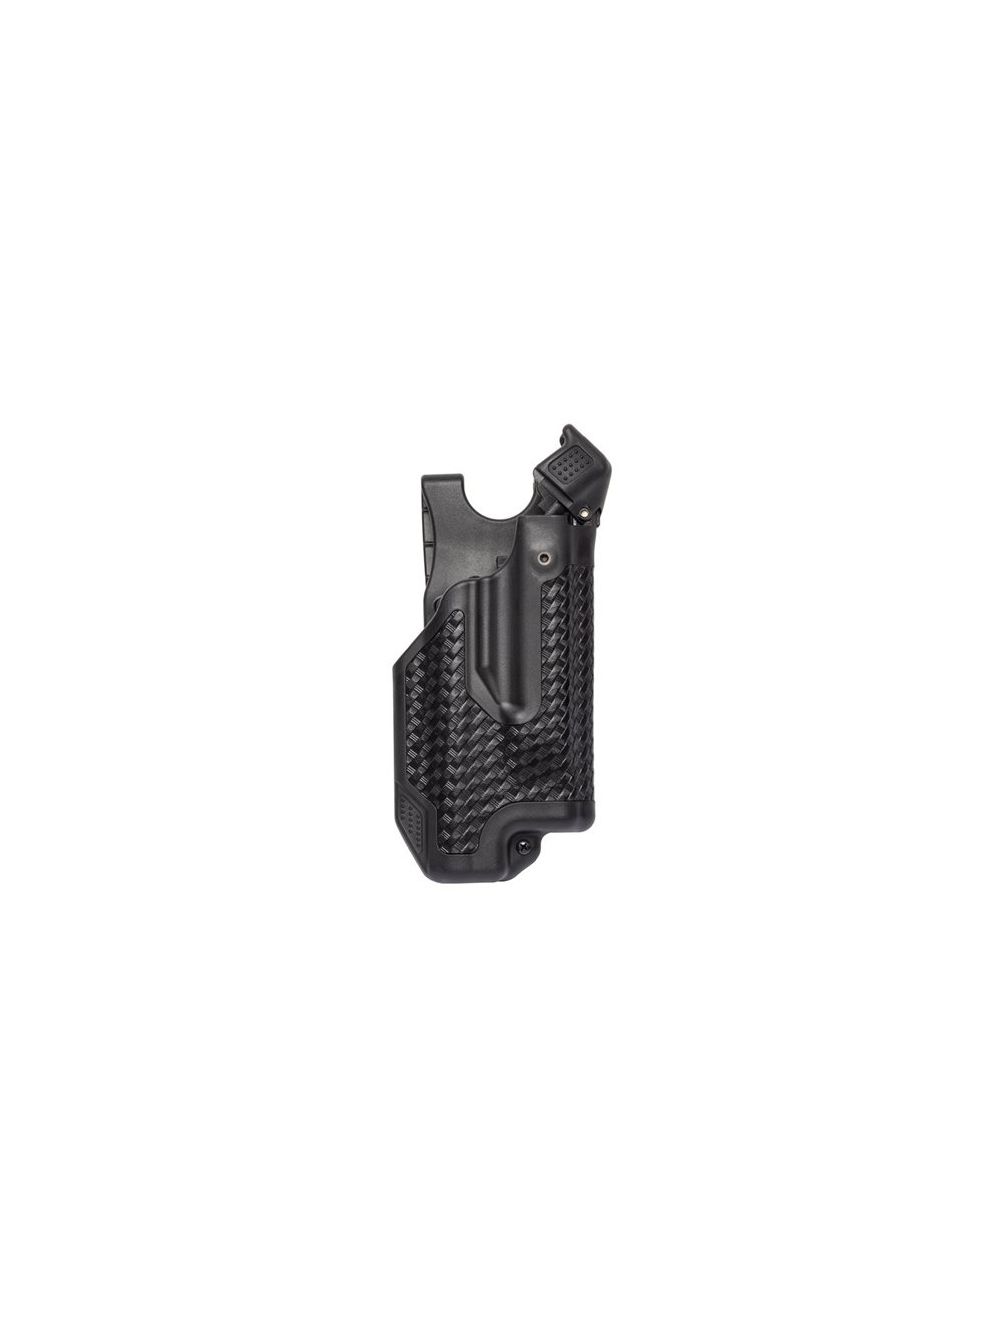 Epoch Tactical L3 Molded Light Bearing